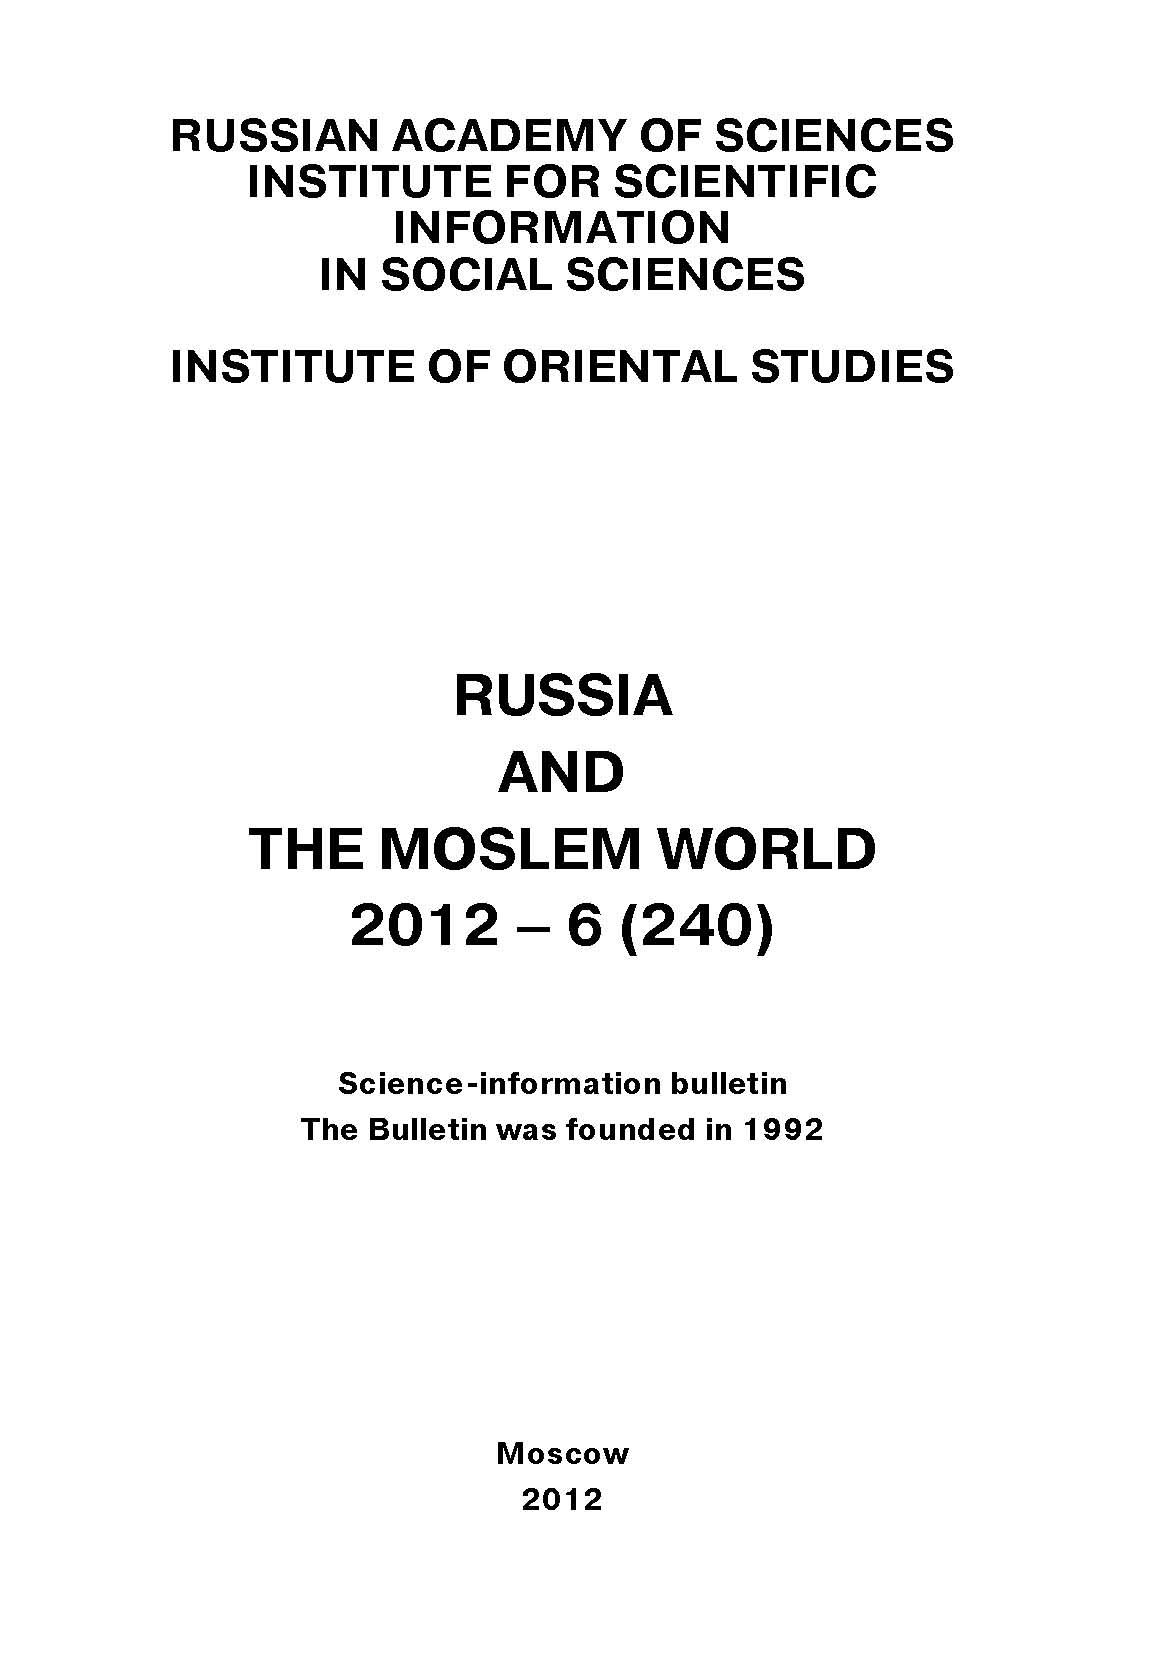 Russia and the Moslem World№ 06 / 2012